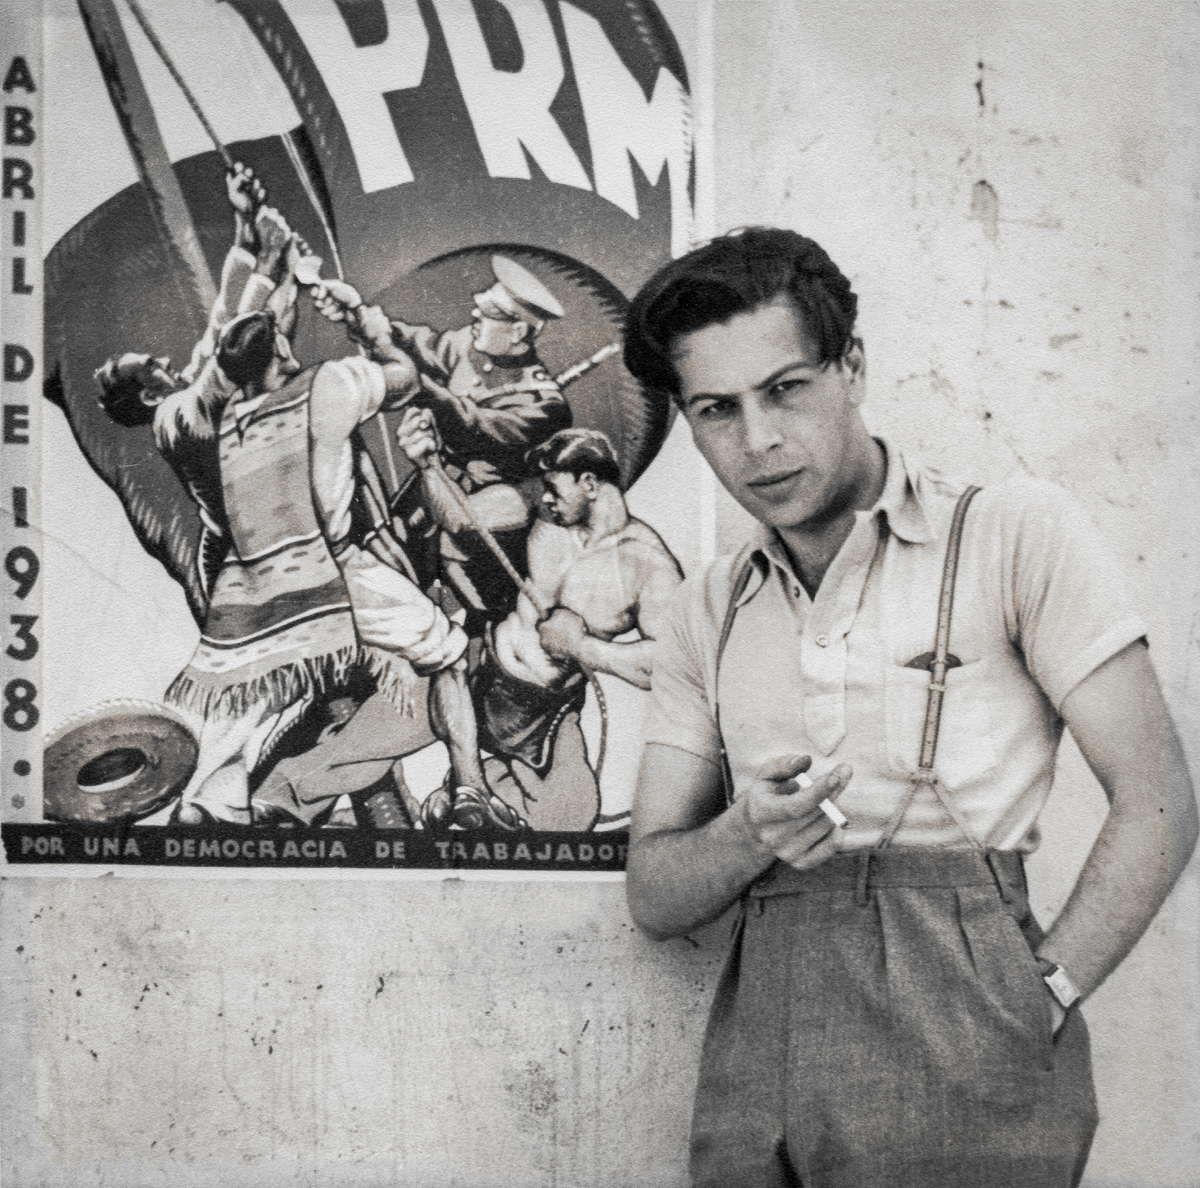 My father, Gene Kern, striking a pose in 1938 in front of a campaign poster for el Partido de la Revolución Mexicana, a predecessor to the current Partido Revolucionario Institucional (PRI).  He was 24 and an aspiring actor, and perhaps intended to use this photo for publicity purposes.  Or maybe he just couldn't resist the opportunity.  The photograph was probably made by a buddy, Pat Miller, who accompanied him on the trip to México and always shot with a Rolleiflex, hence the square format. View full size.